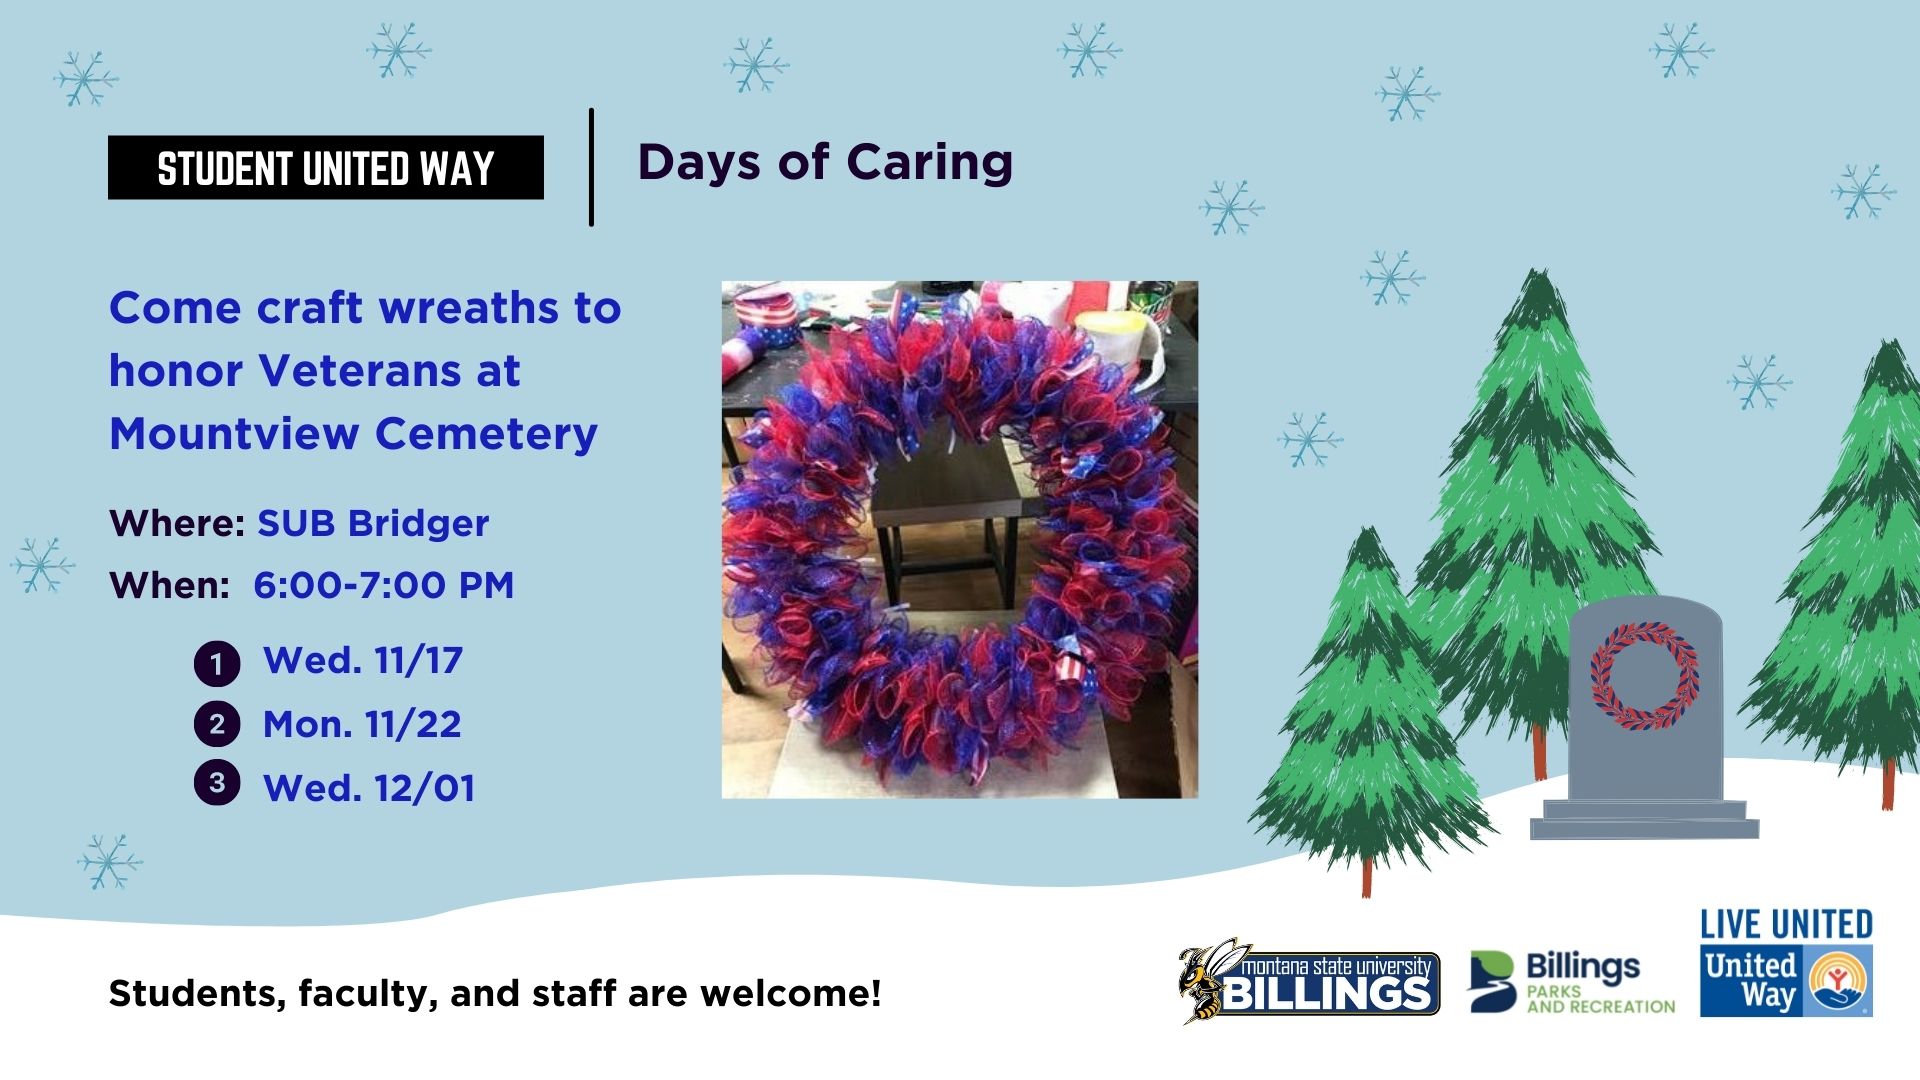 Days of Caring. Come craft wreaths to honor Veterans at Mountview Cemetery. Where: SUB Bridger. When: 6-7 PM Wednesday November 17, Monday Monday 22, and Wednesday December 1. Students, faculty, and staff are welcome.